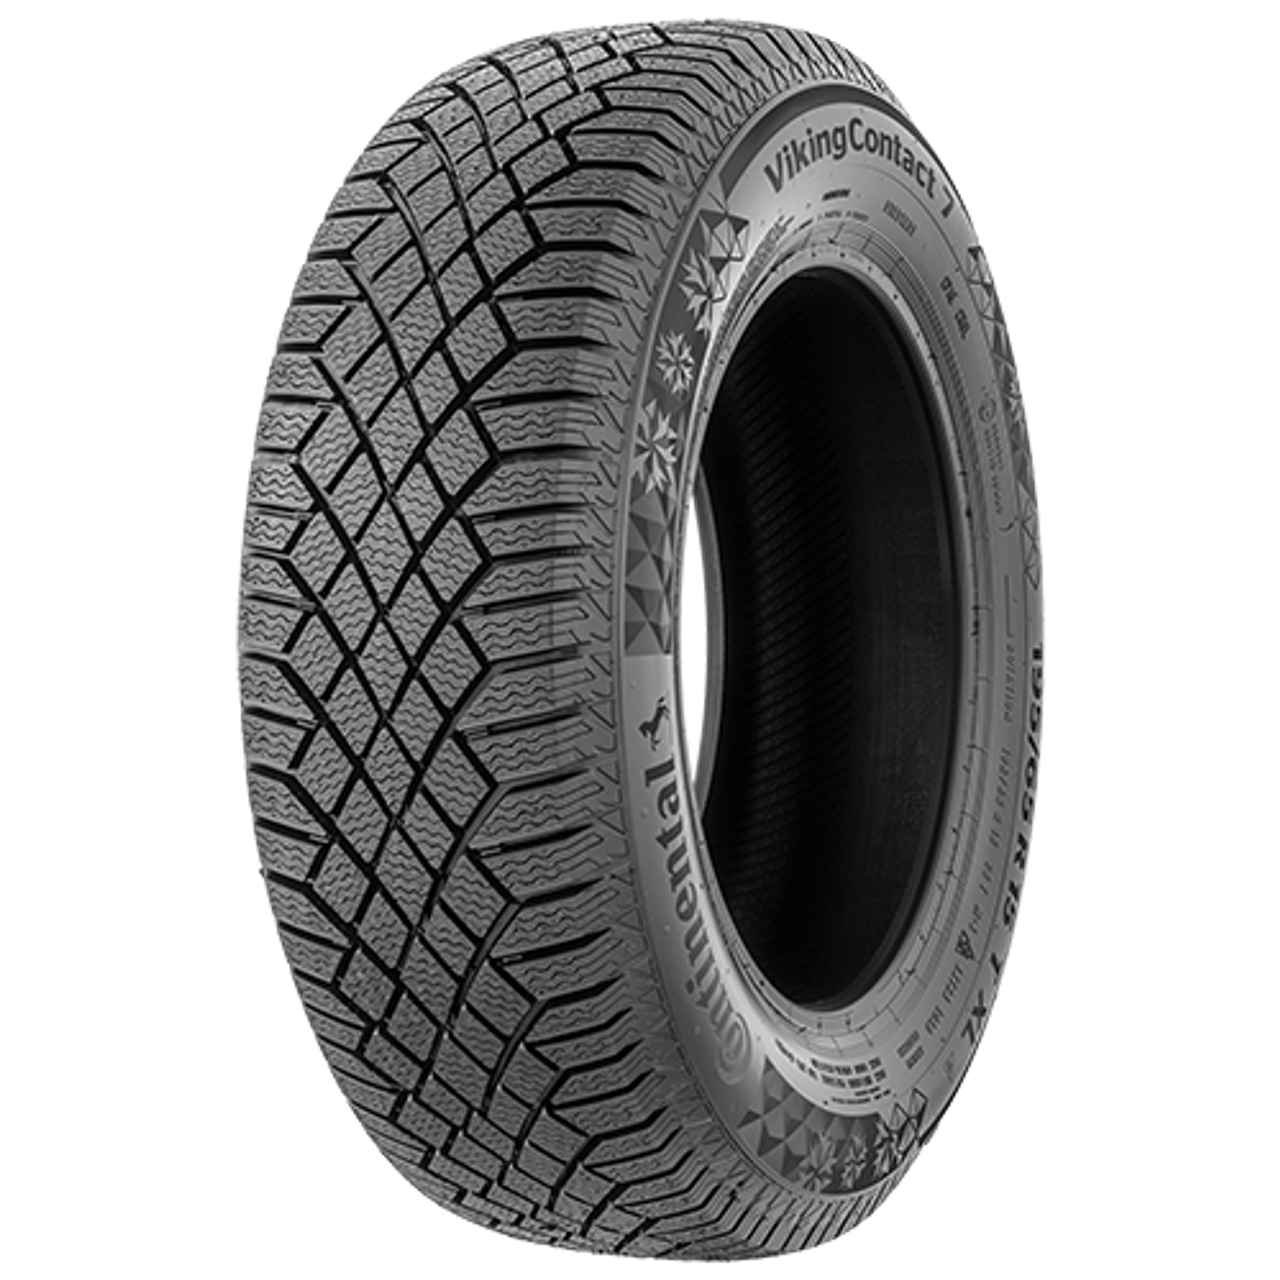 CONTINENTAL VIKINGCONTACT 7 205/55R16 94T NORDIC COMPOUND BSW XL